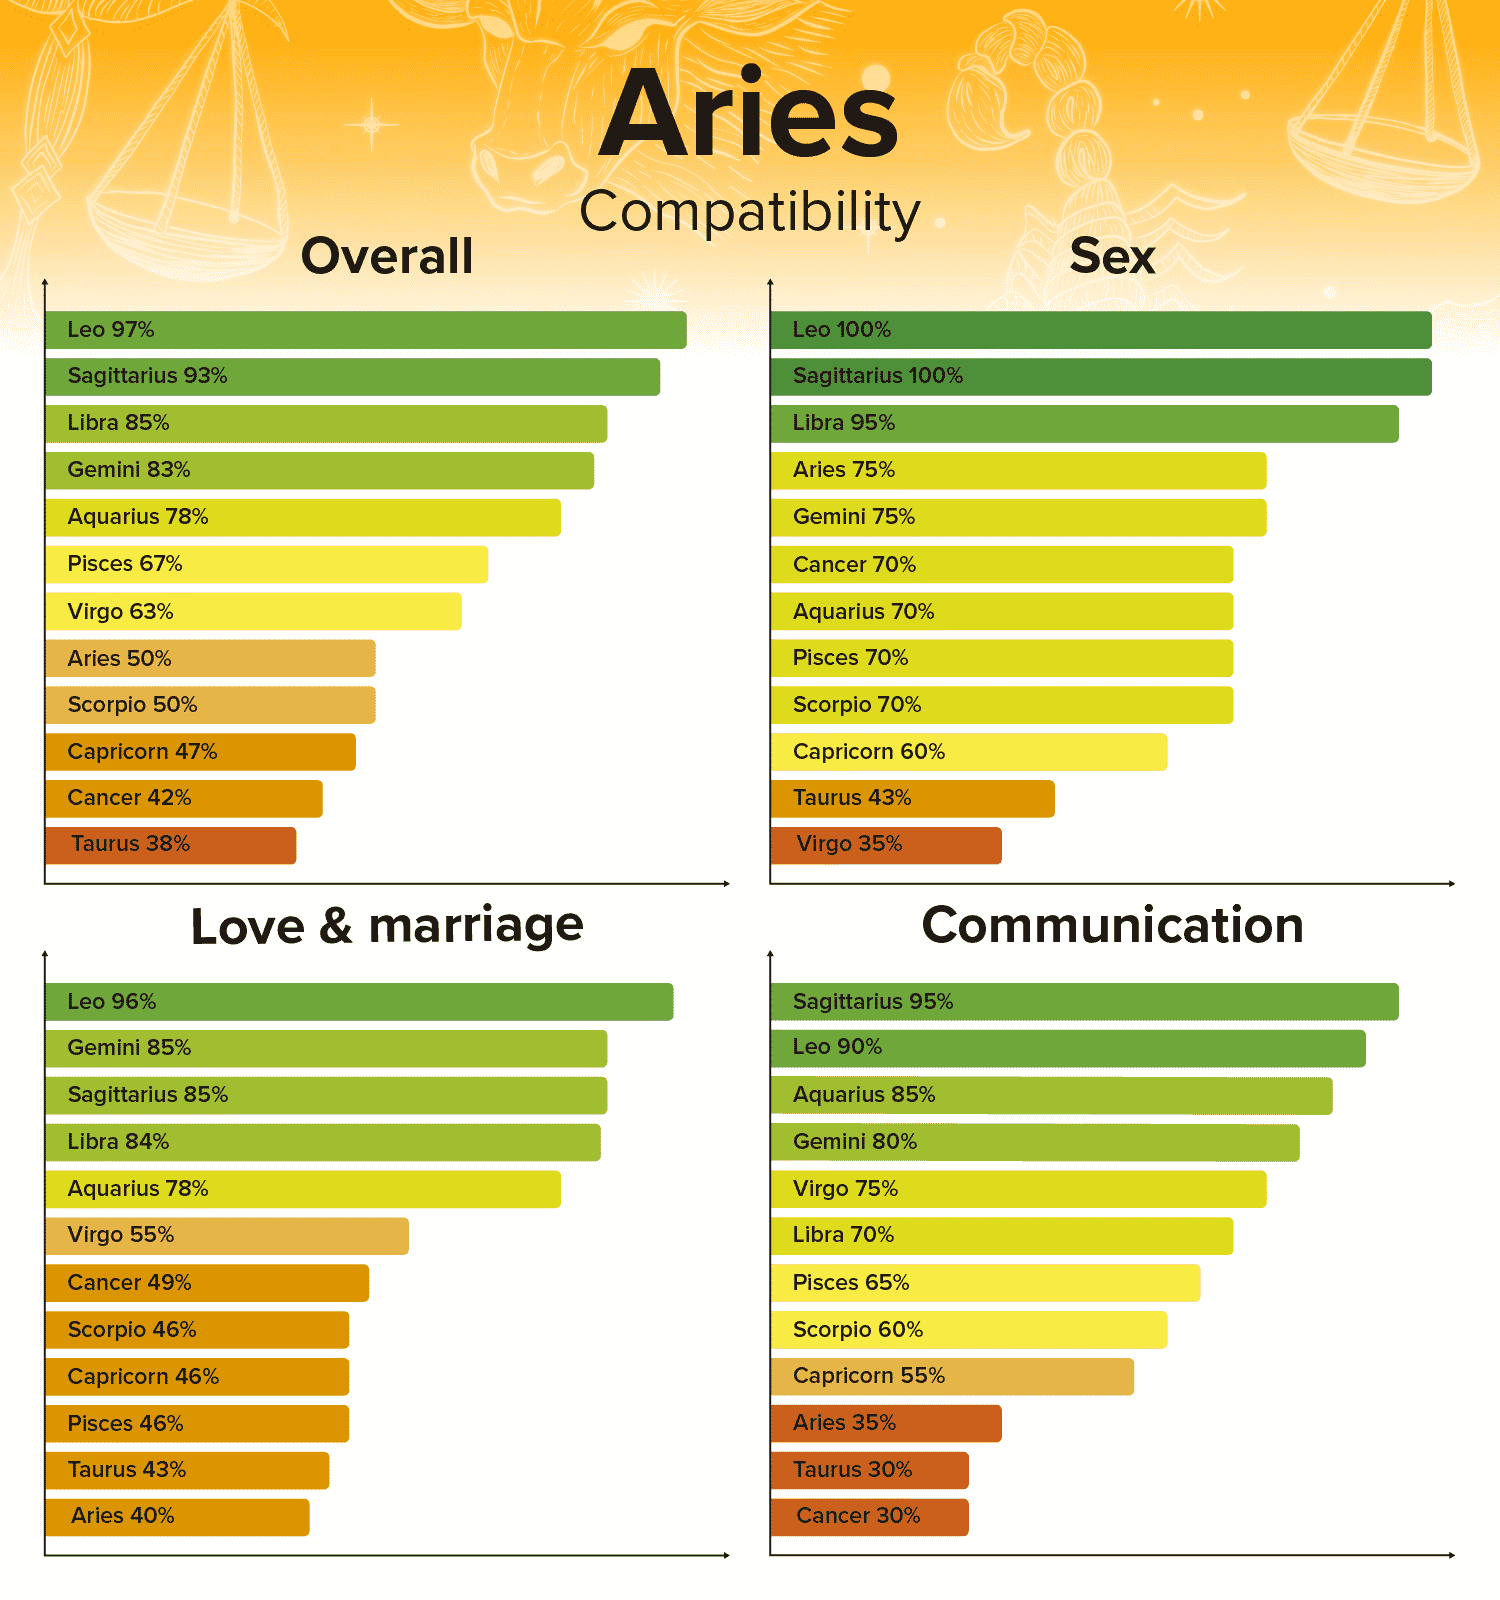 Zodiac signs marriage partners